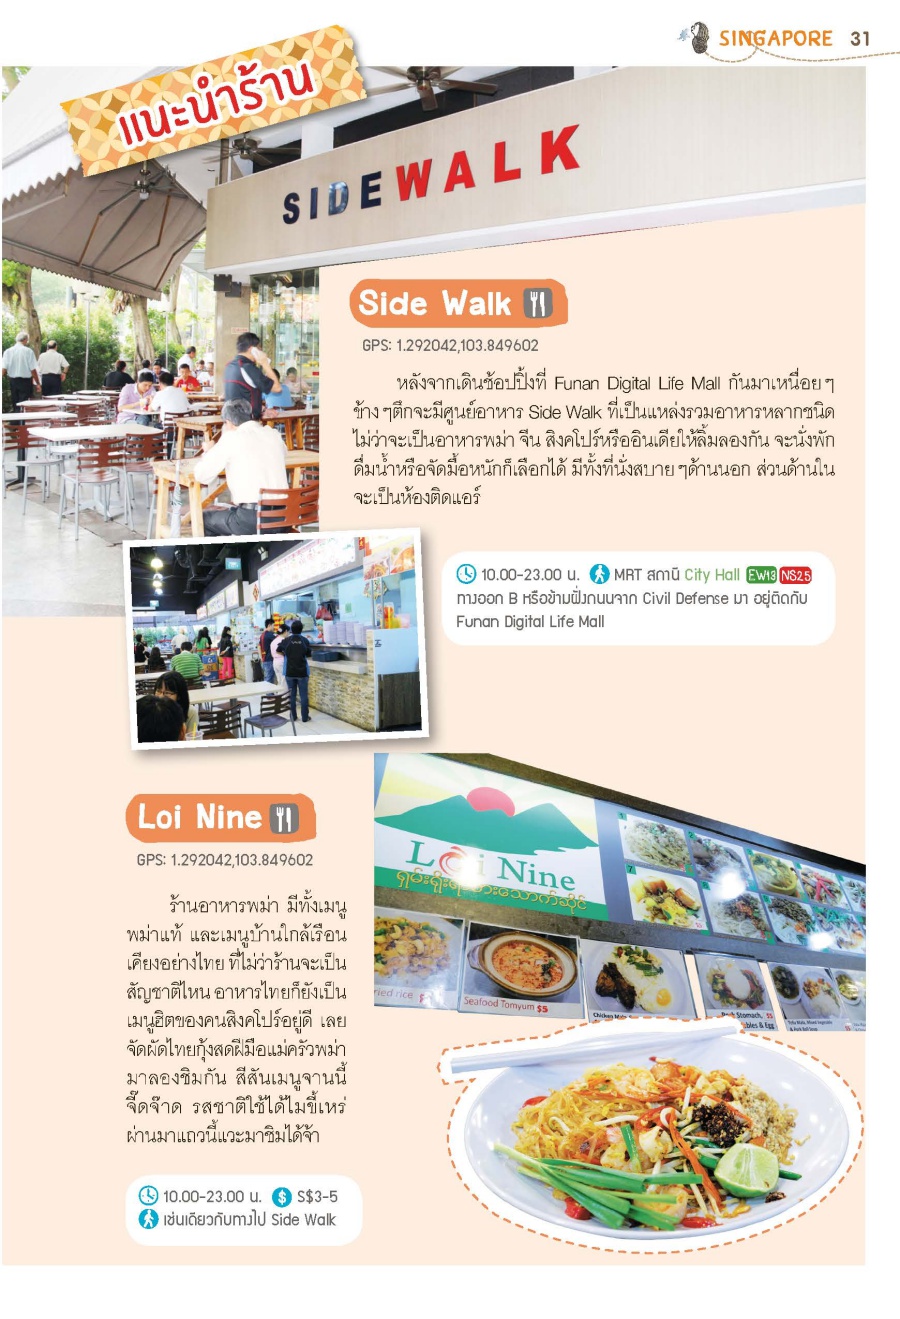 Route Singapore Page 31 